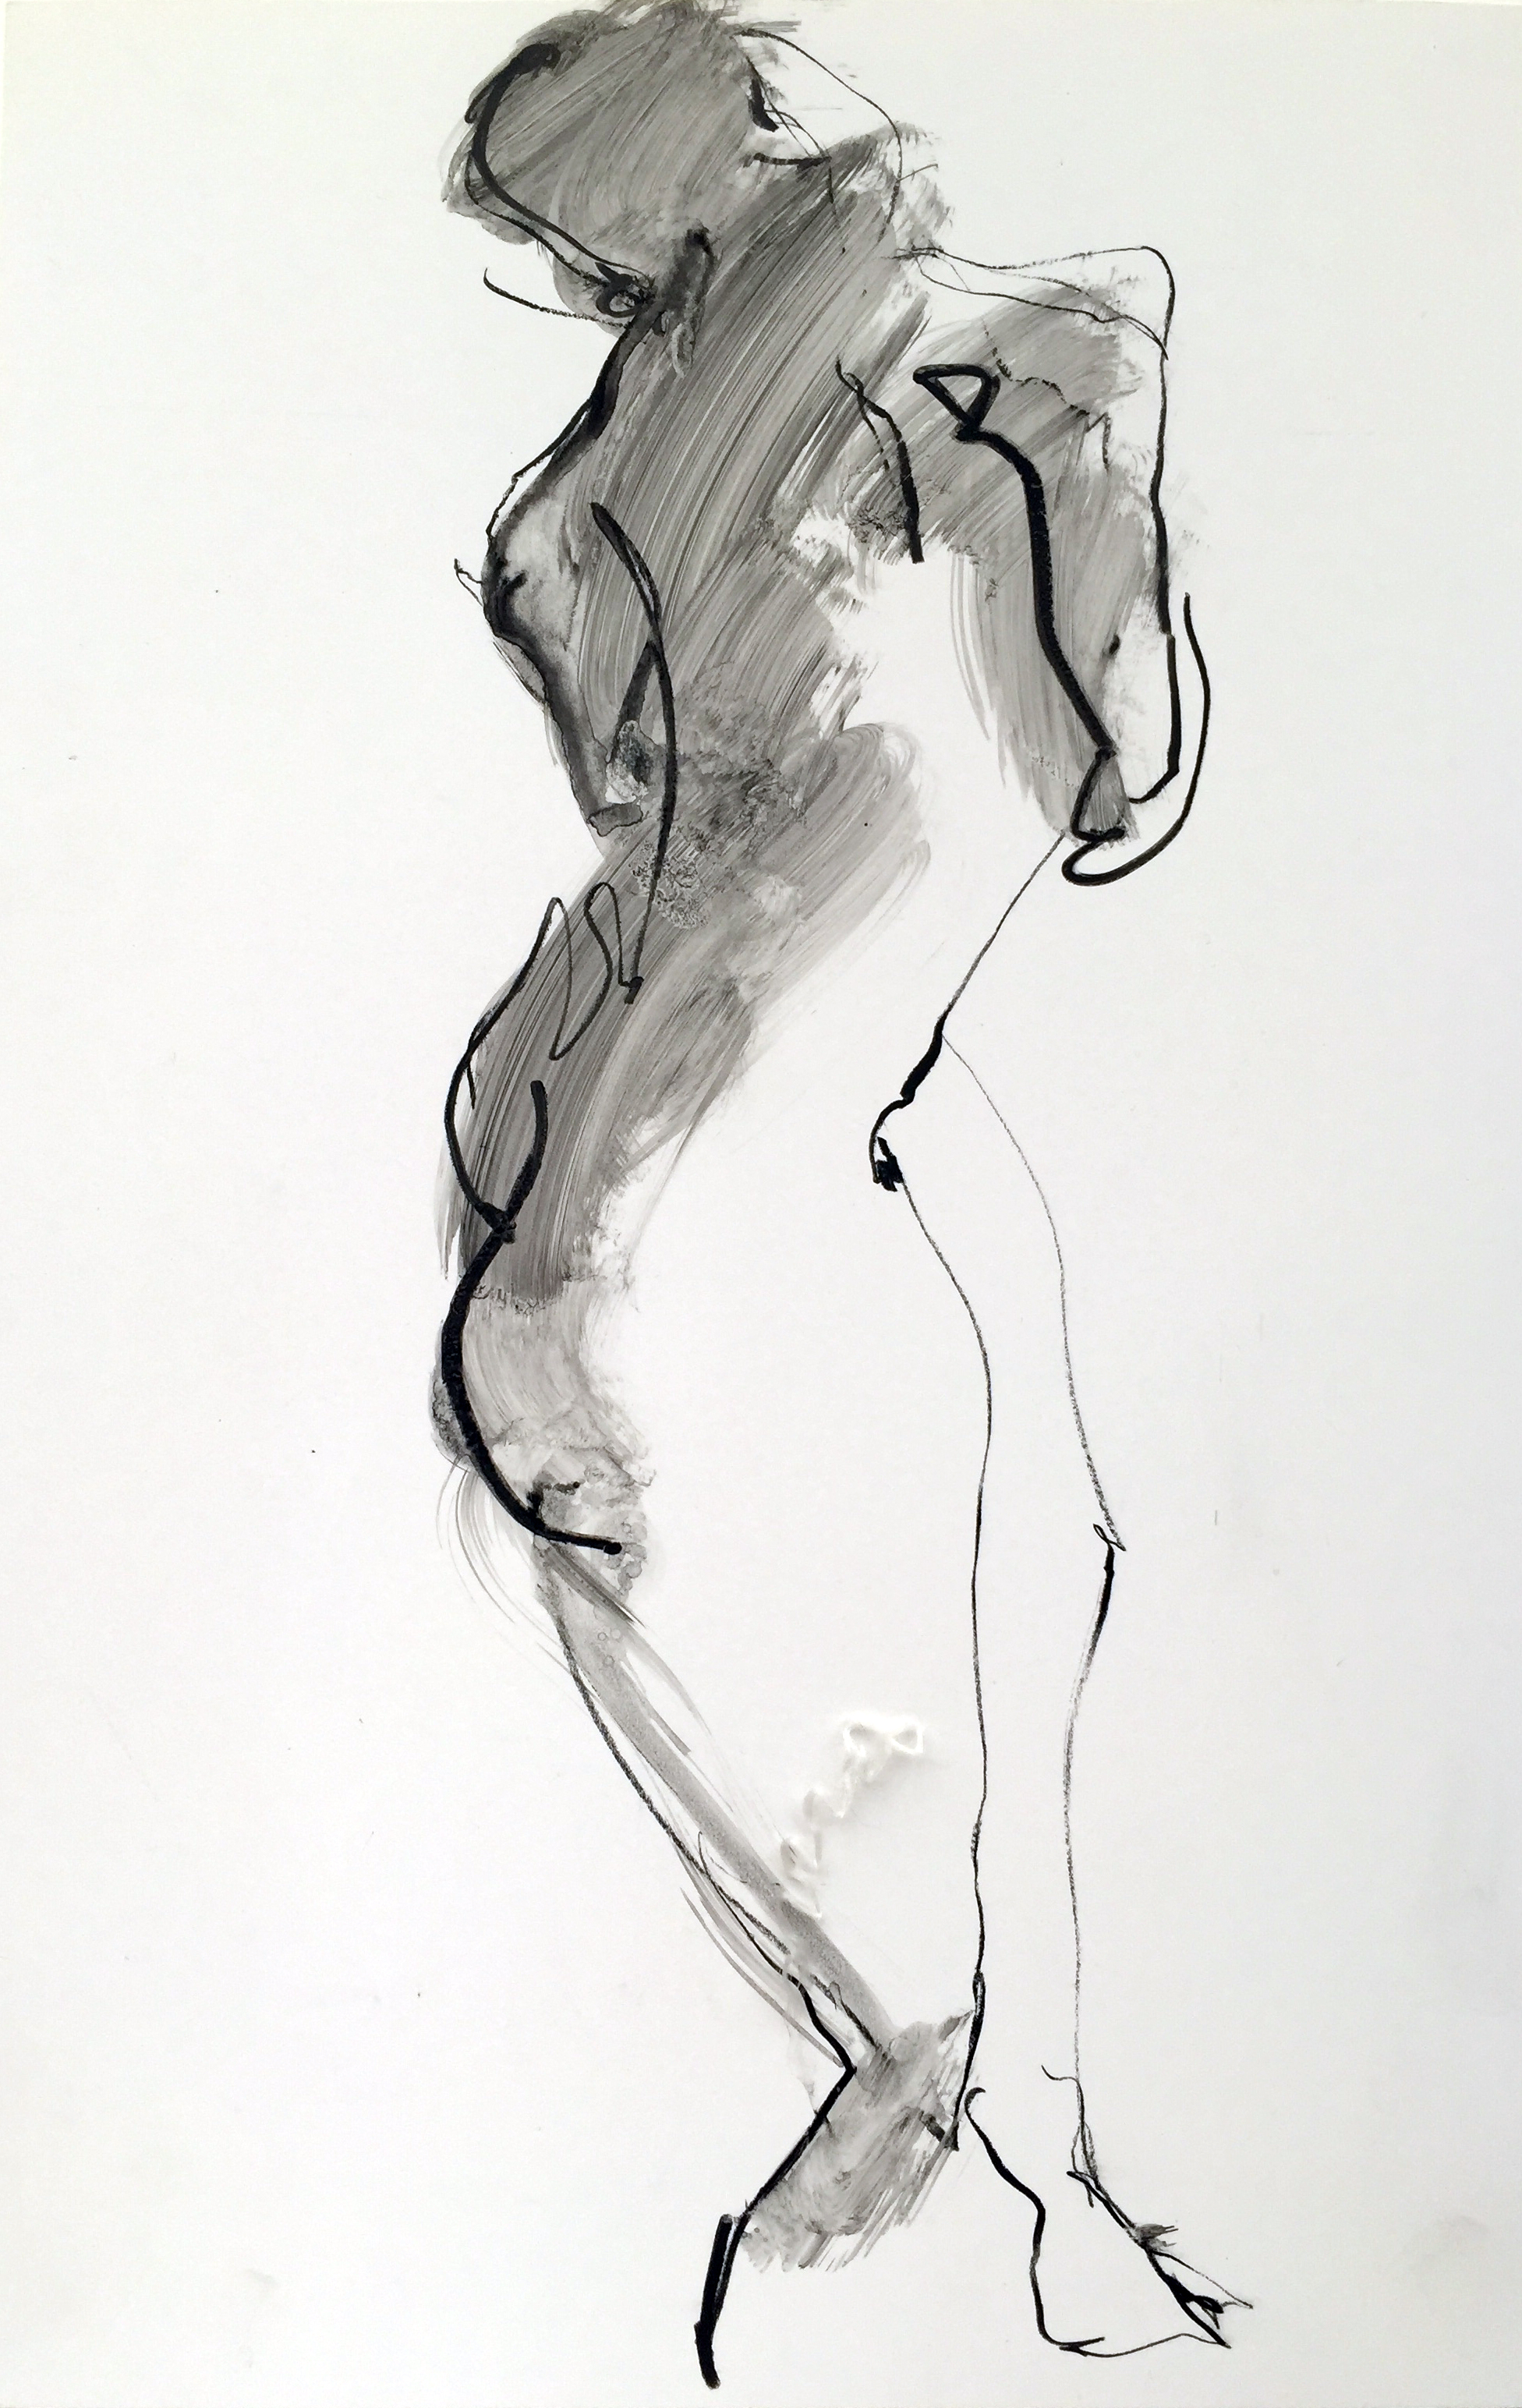   Nude 23  2013 Watercrayon on paper 16" x 11" 